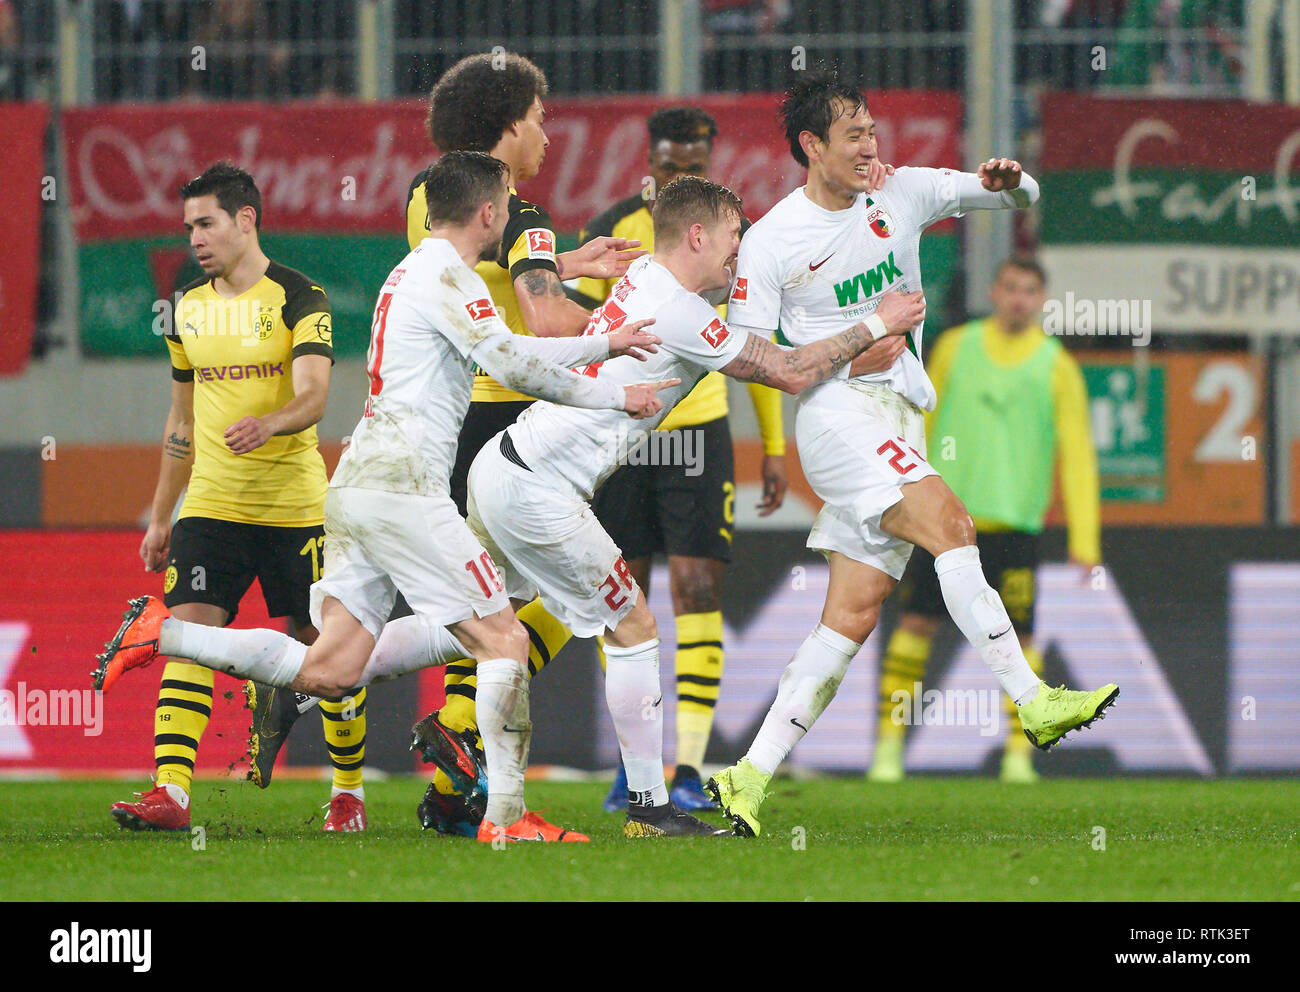 Augsburg, Germany. 01st Mar, 2019. Dong-Won JI, FCA 22 celebrates his goal for 2-0, happy, laugh, celebration, Ja-Cheol KOO, FCA 19 Daniel BAIER, FCA 10 Andre HAHN, FCA 28 Cheering, joy, emotions, celebrating, laughing, cheering, rejoice, tearing up the arms, clenching the fist, celebrate, celebration, Axel WITSEL, BVB 28 FC AUGSBURG - BORUSSIA DORTMUND 2-1 - DFL REGULATIONS PROHIBIT ANY USE OF PHOTOGRAPHS as IMAGE SEQUENCES and/or QUASI-VIDEO - 1.German Soccer League, Augsburg, March 1, 2019 Season 2018/2019, matchday 24, BVB, Bavaria Credit: Peter Schatz/Alamy Live News Stock Photo